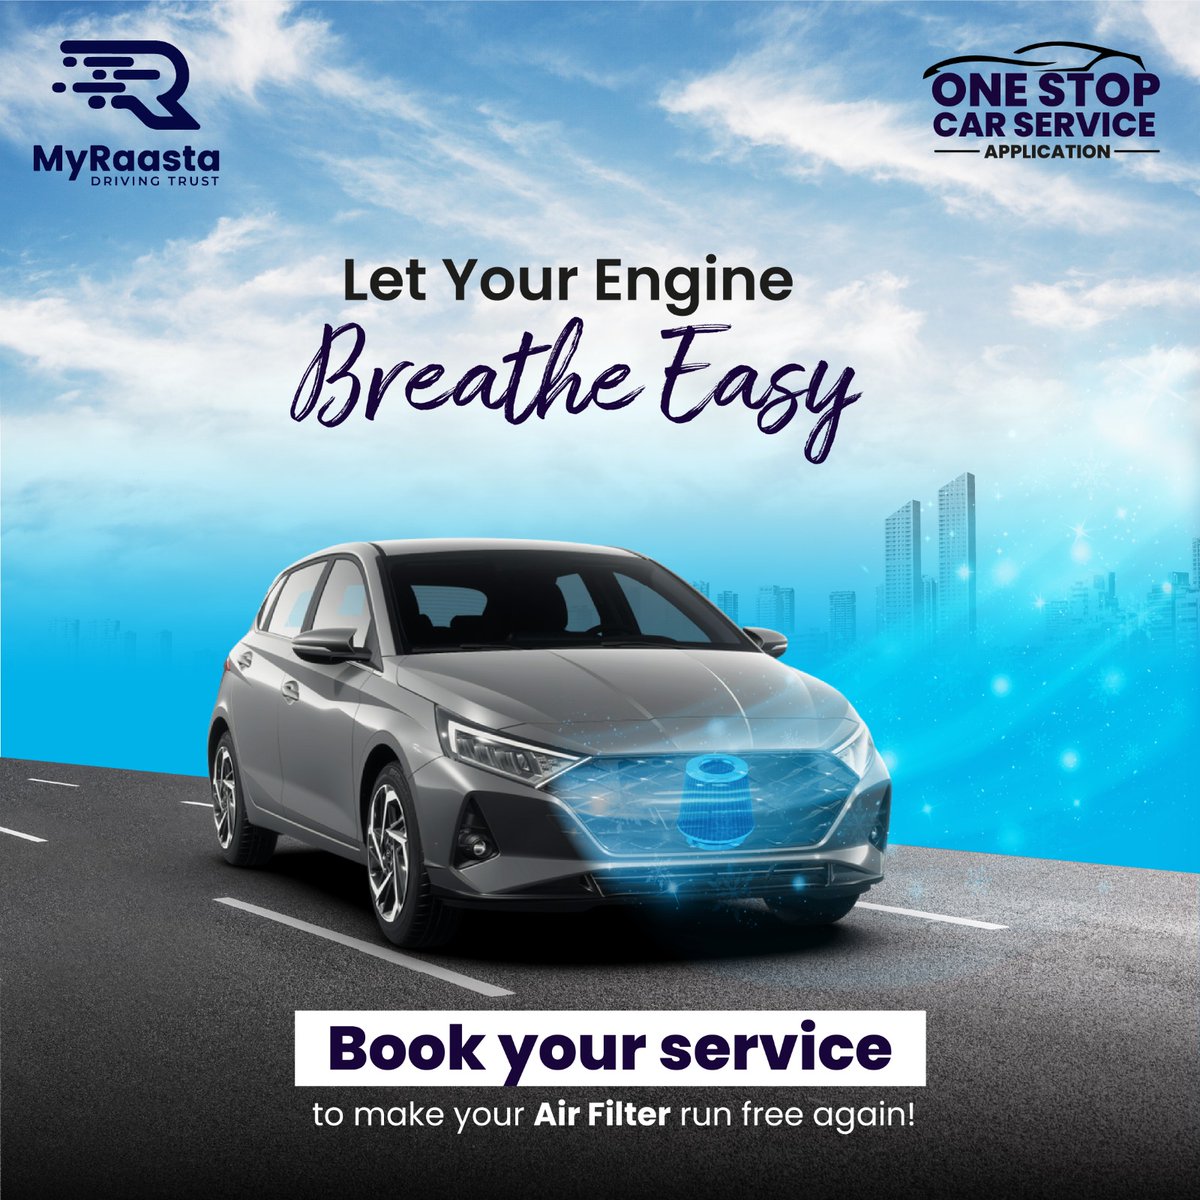 A clean air filter means driving longer and less engine troubles. Let's keep you going!
.
.
.

#airfilter #breatheeasy #booknow #bookyourservice #car #carservice #carserviceexperts #onestop #carmaintainance